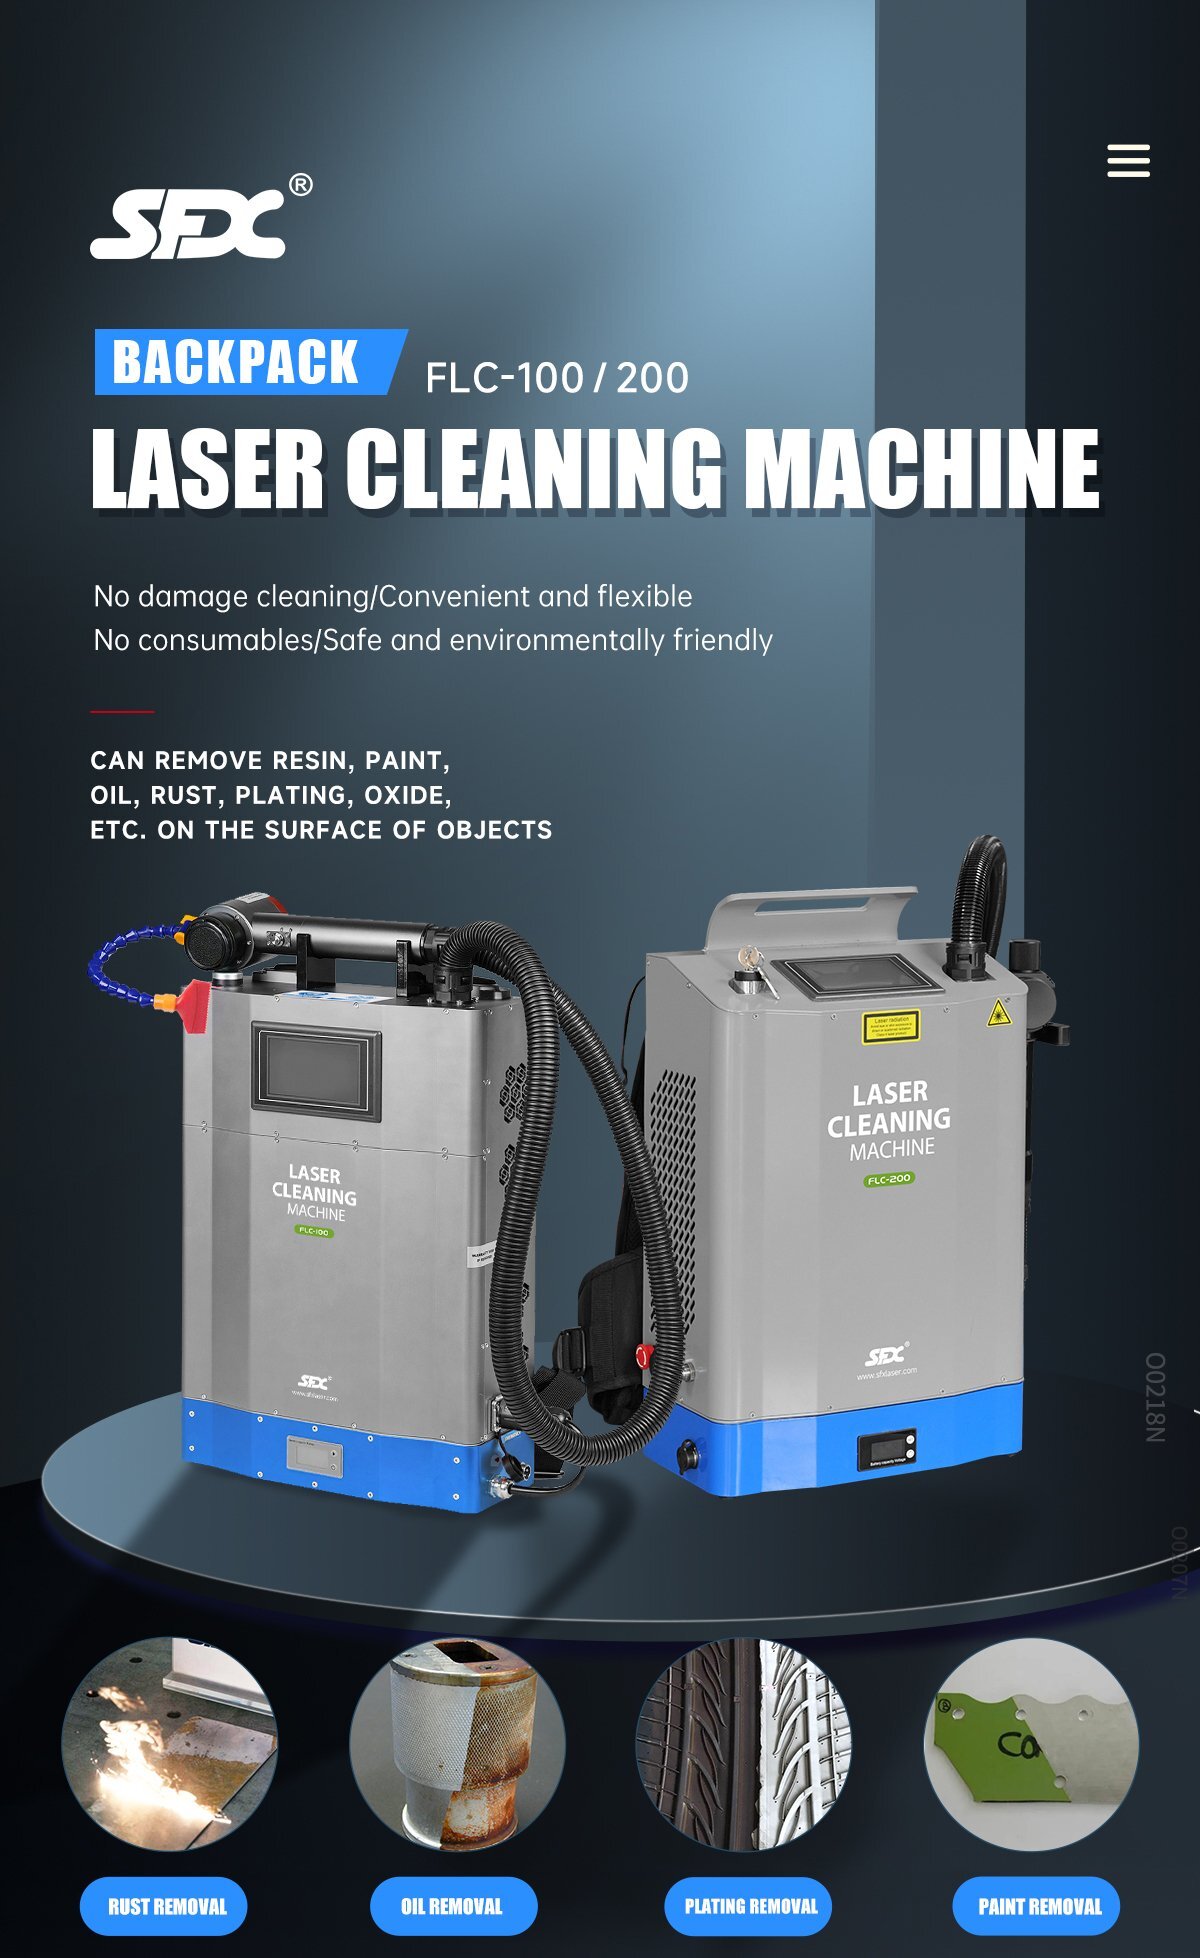 SFX 100watt Pulsed Backpack Laser Cleaning Machine with Rechargeable Battery for Remove Rust Coating Paint Easily With Comfortable Back Frame SFX 100W Rechargeable Pulsed Backpack Fiber Laser Cleaner Rust Removal Graffiti Cleaning portable backpack pulse laser cleaning machine rust removing,small size and lightweight laser cleanner 100watt,fiber laser cleaning machine rechargeable,SFX laser,sfx portable fiber laser cleaning machine machine,backpack laser cleaner for rust removal,laser rust removal machine for sale,laser cleaning machine 100w backpack type,battery laser cleaning machine,portable handheld laser cleaning machine,hand held laser cleaning machine for rust removal